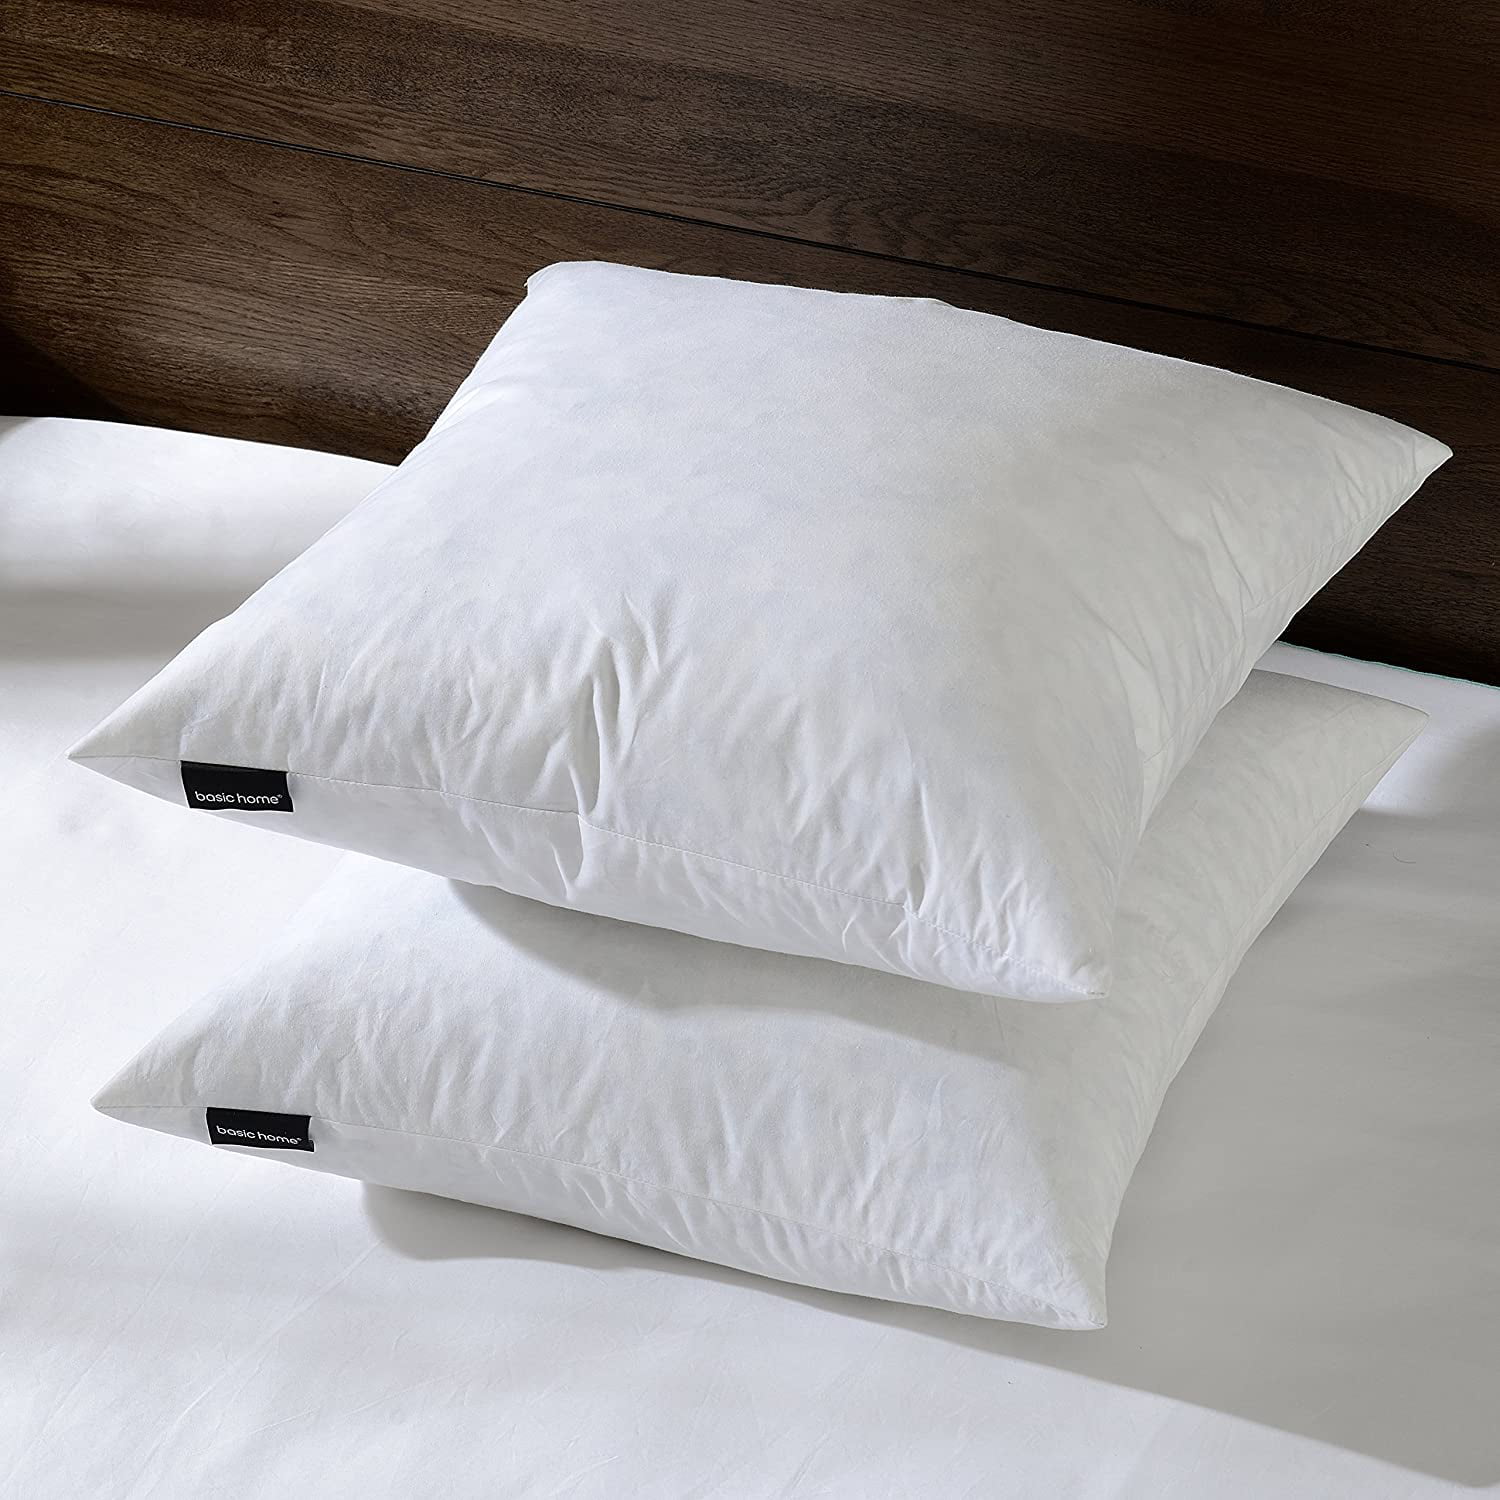 Bedding Throw Pillows Insert (1 Pack White) - 19.6x19.6 Inches Bed